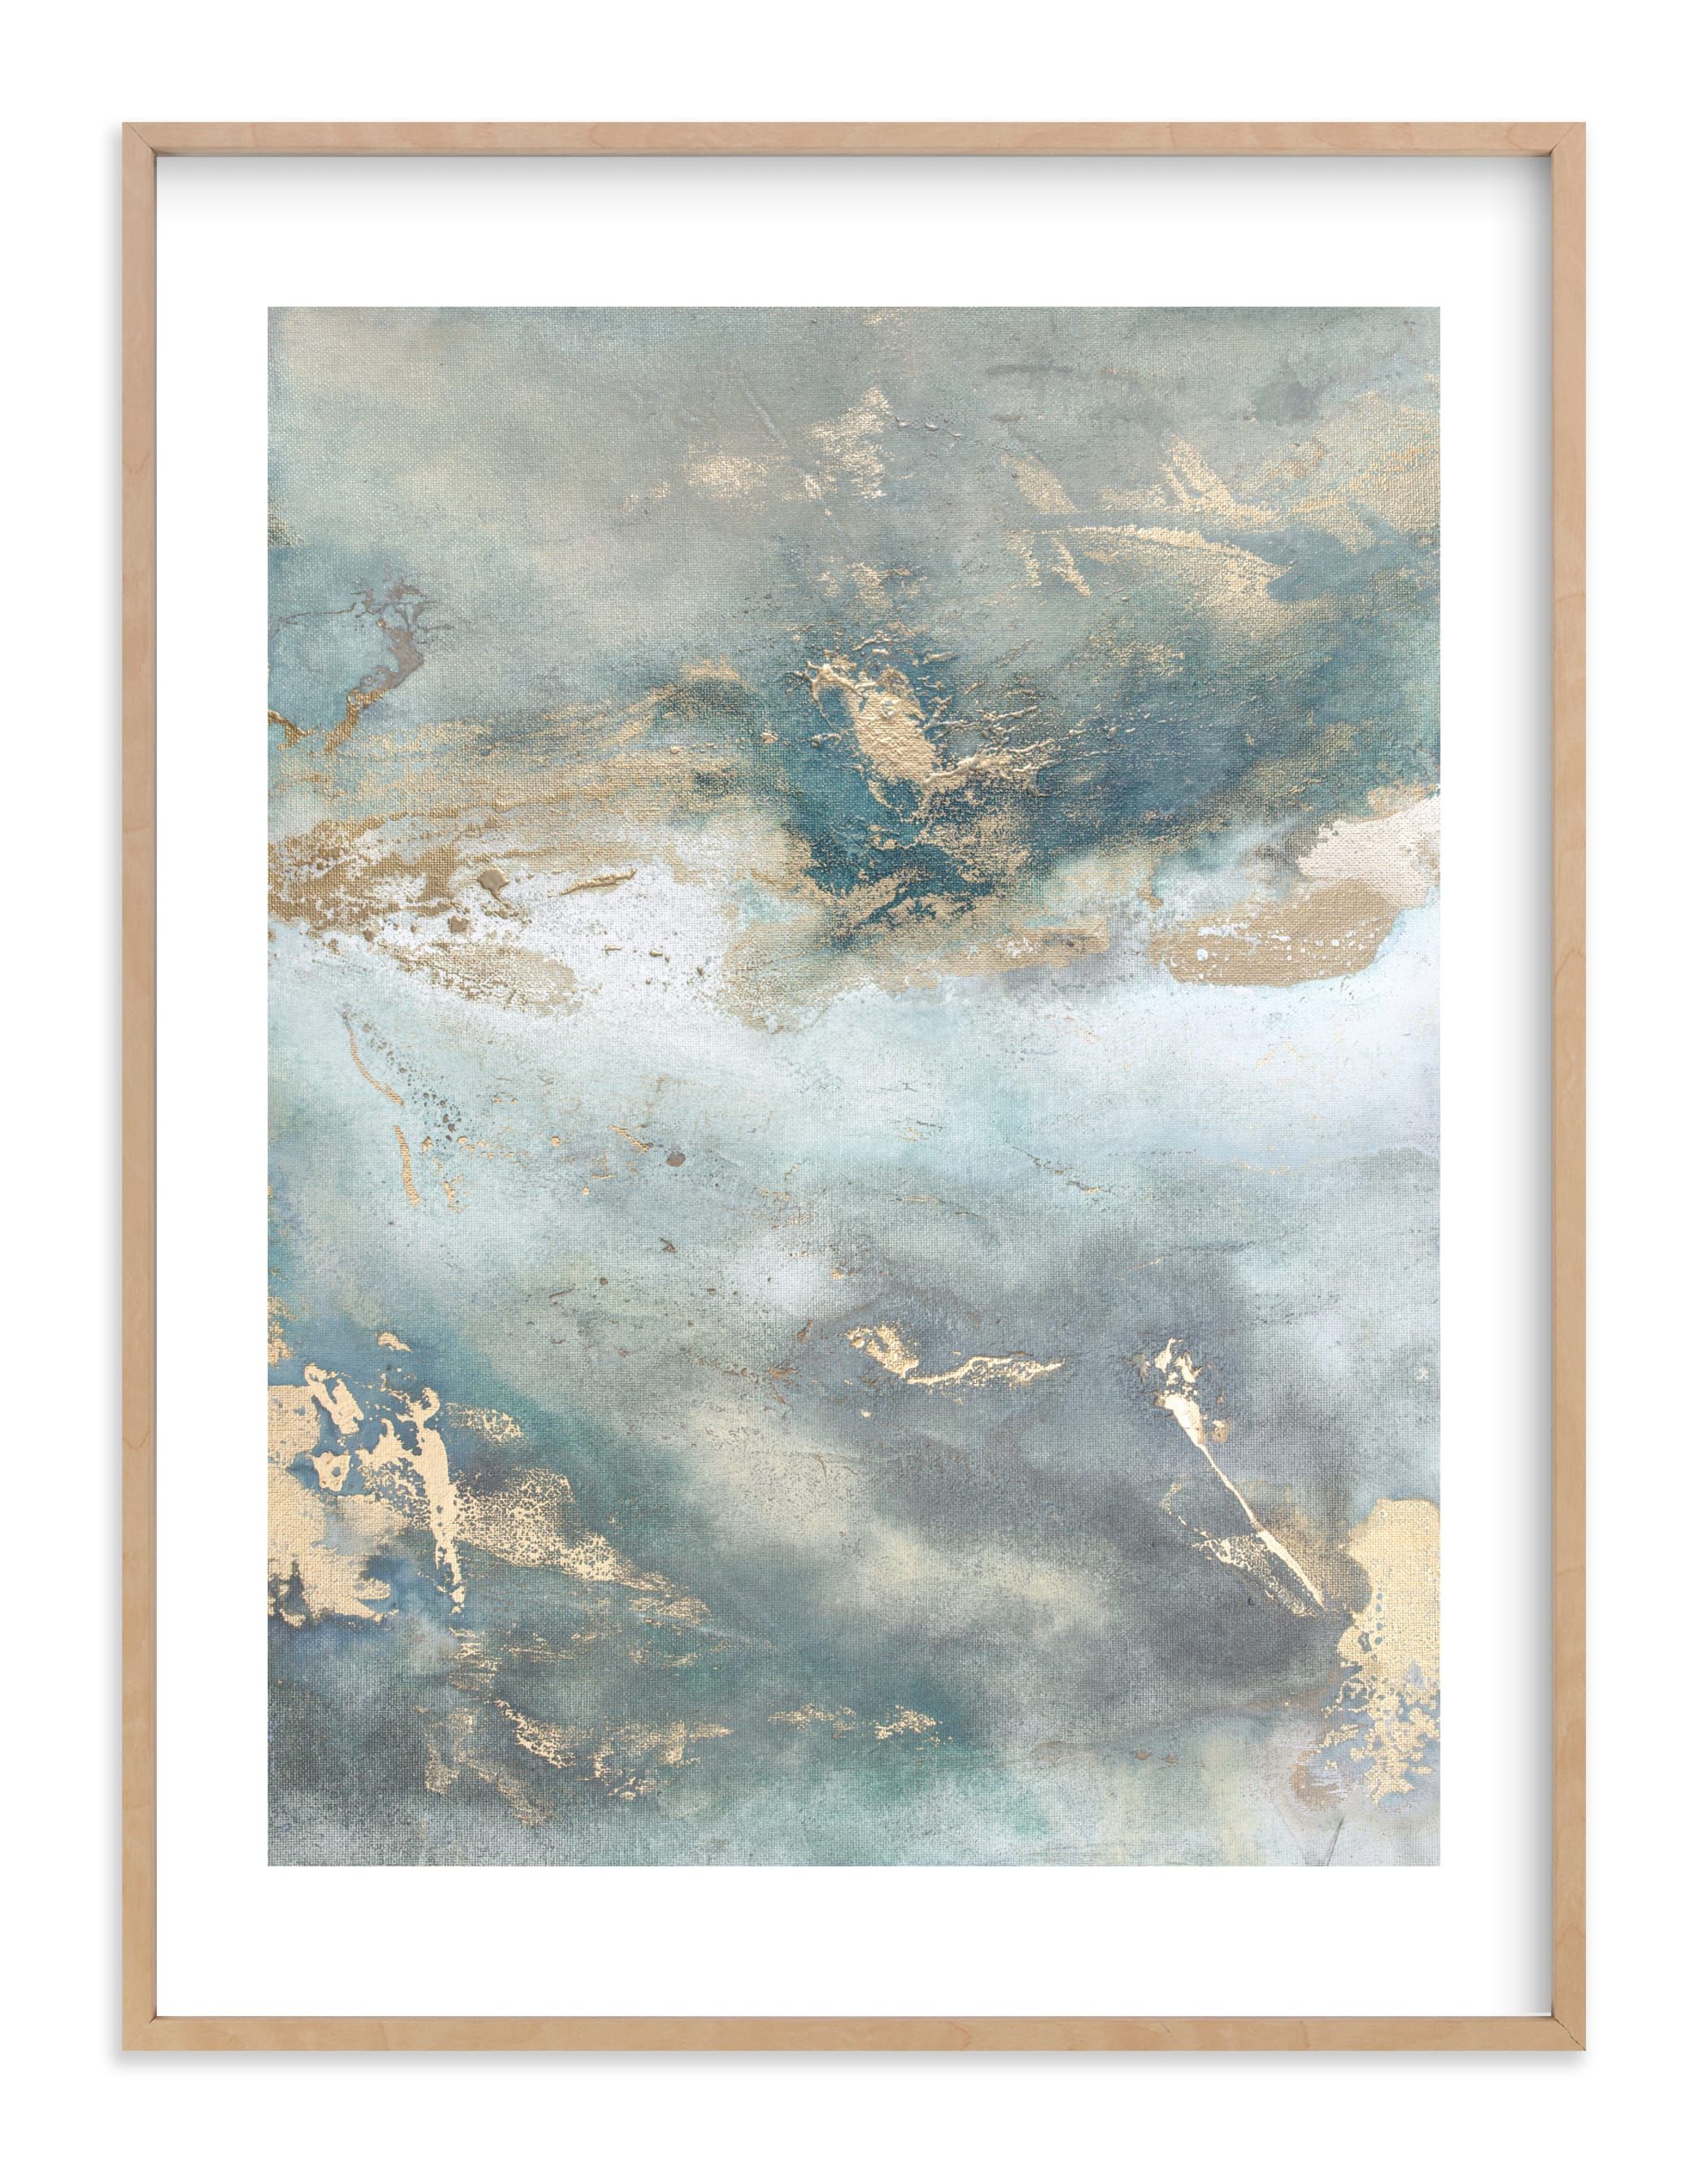 "Luminous Smoke No. 2" - Painting Limited Edition Art Print by Julia Contacessi. | Minted